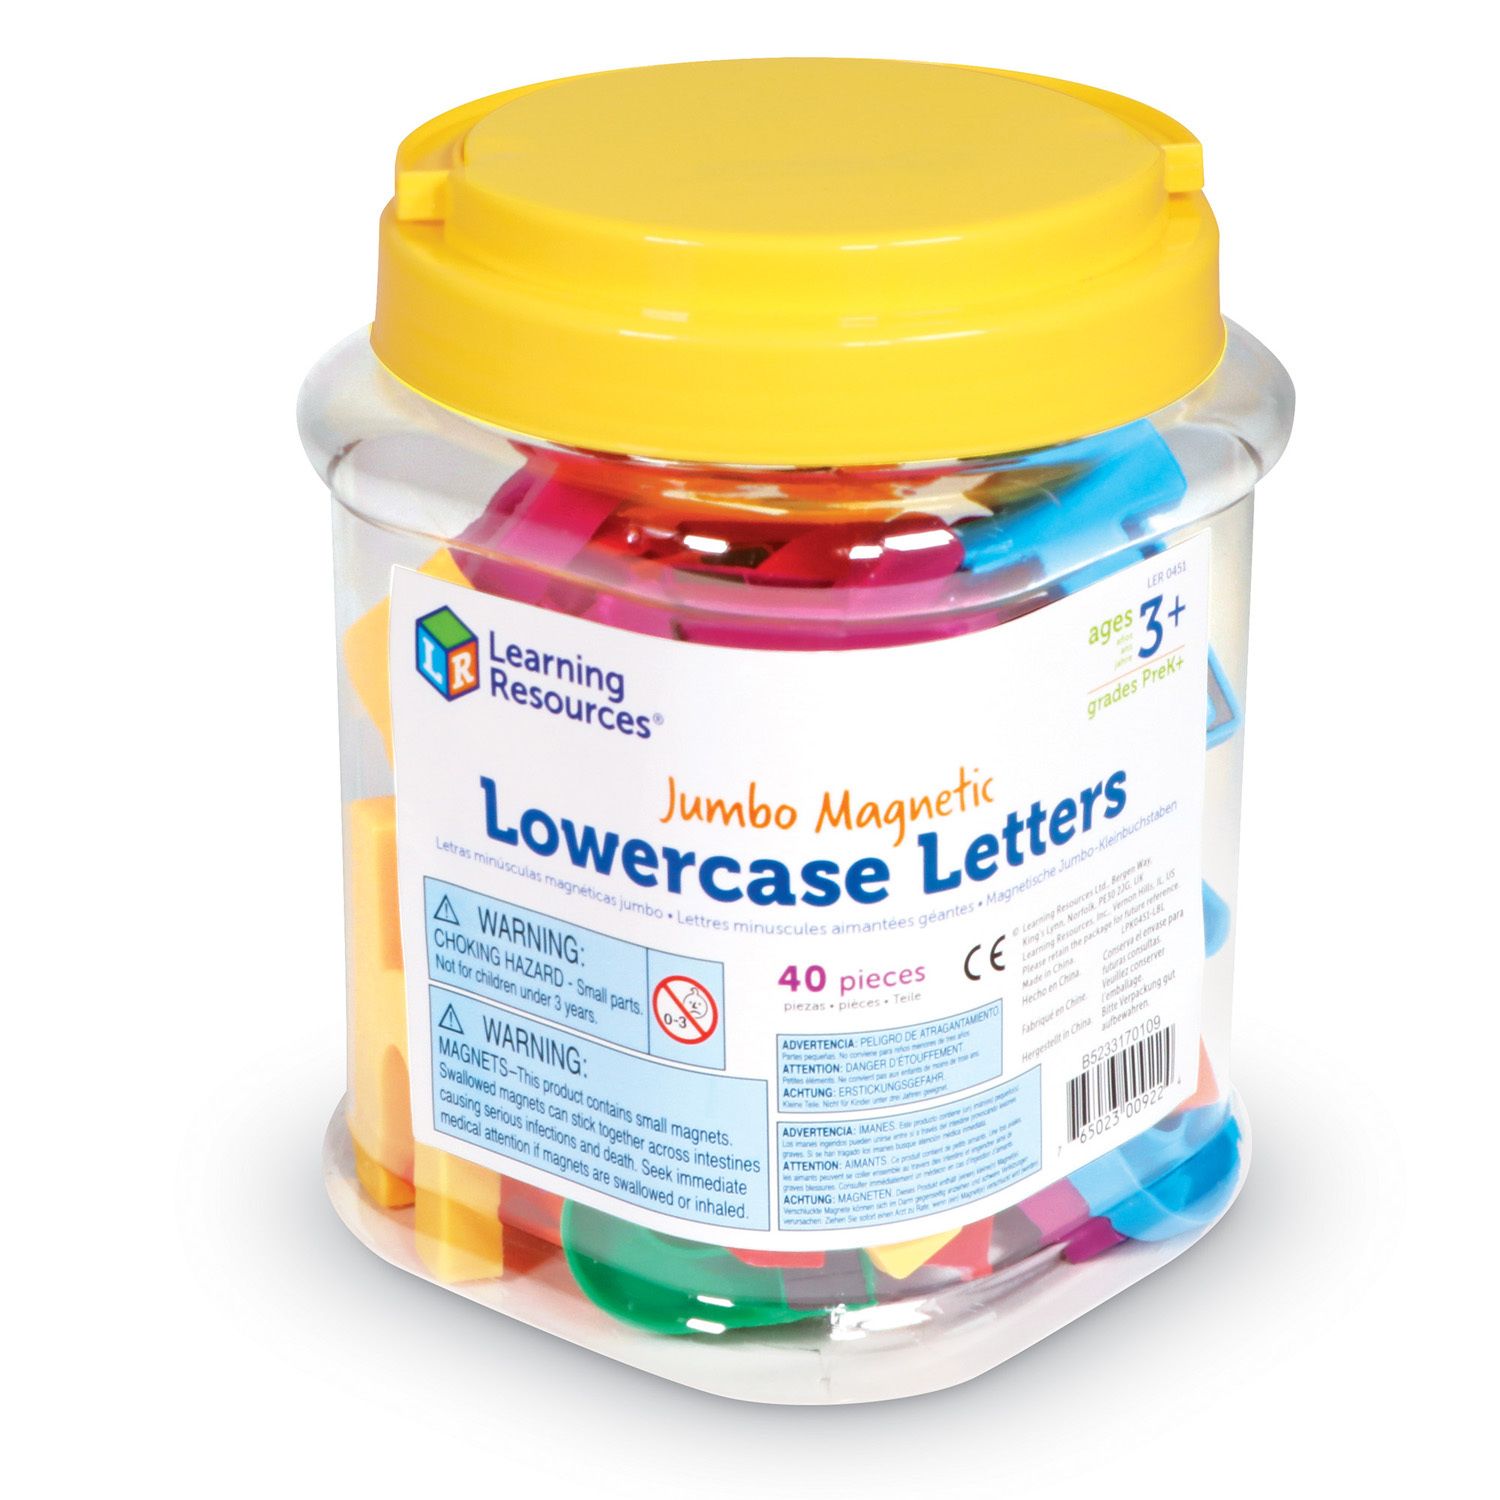 Image for Learning Resources Jumbo Lowercase Magnetic Letters at Kohl's.